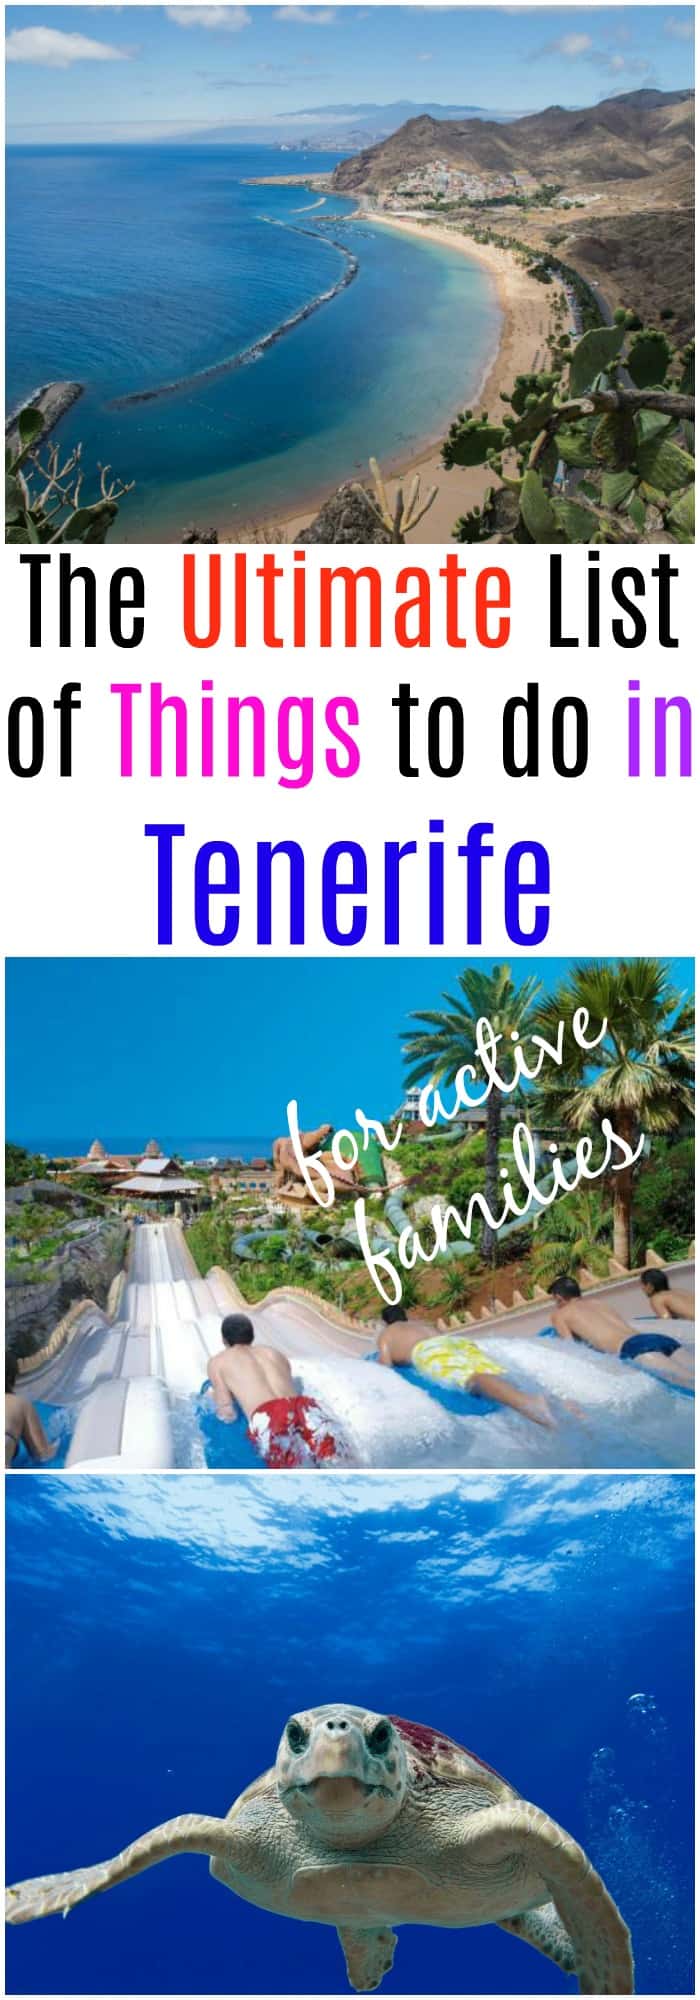 The ultimate list of things to do in Tenerife with kids - The active family travel itinerary 